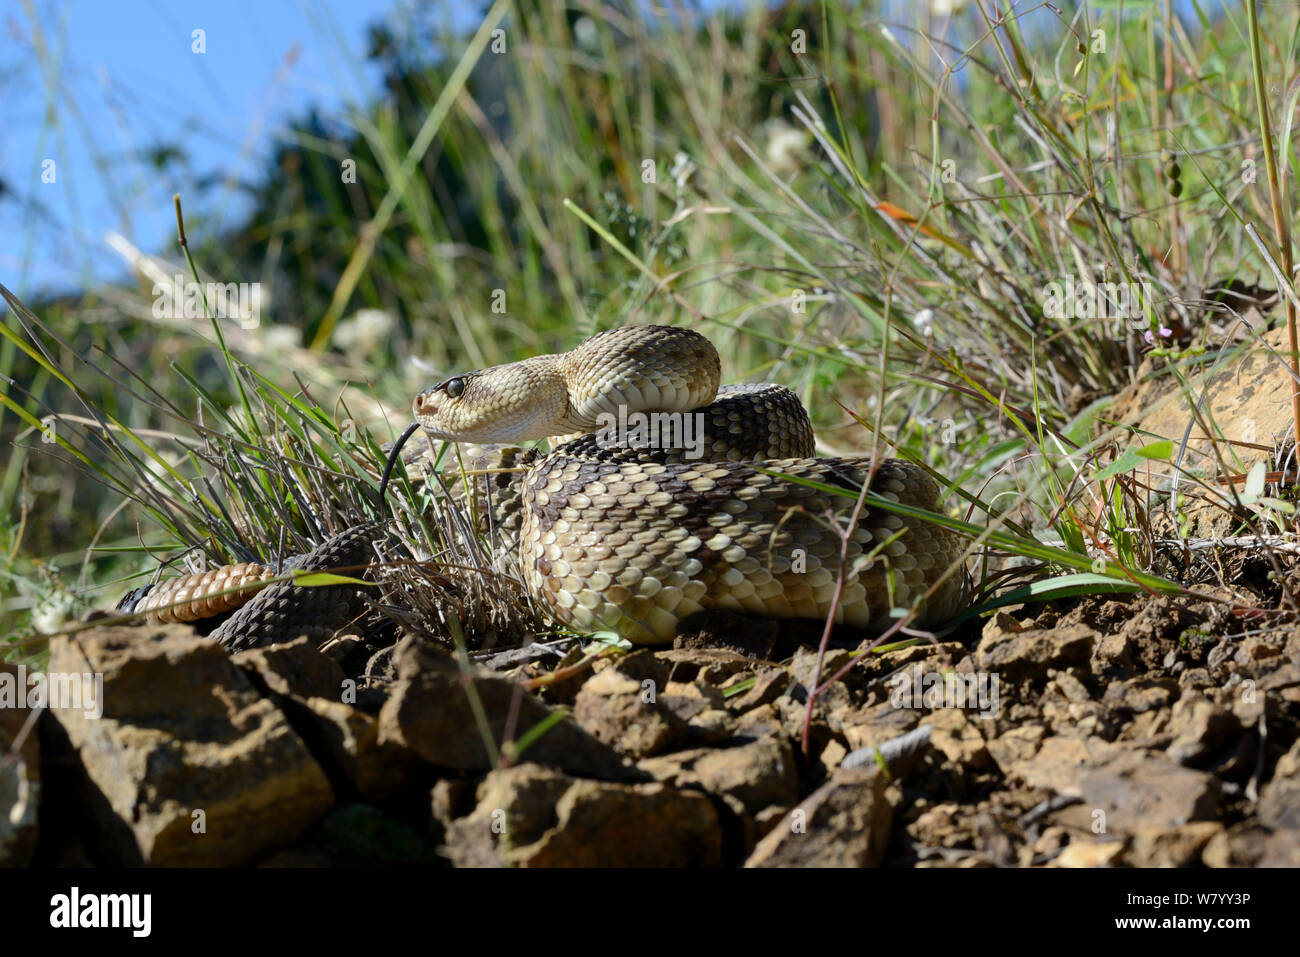 Black-tailed rattlesnake (Crotalus molossus) tasting the air, Arizona, USA, September. Controlled conditions Stock Photo